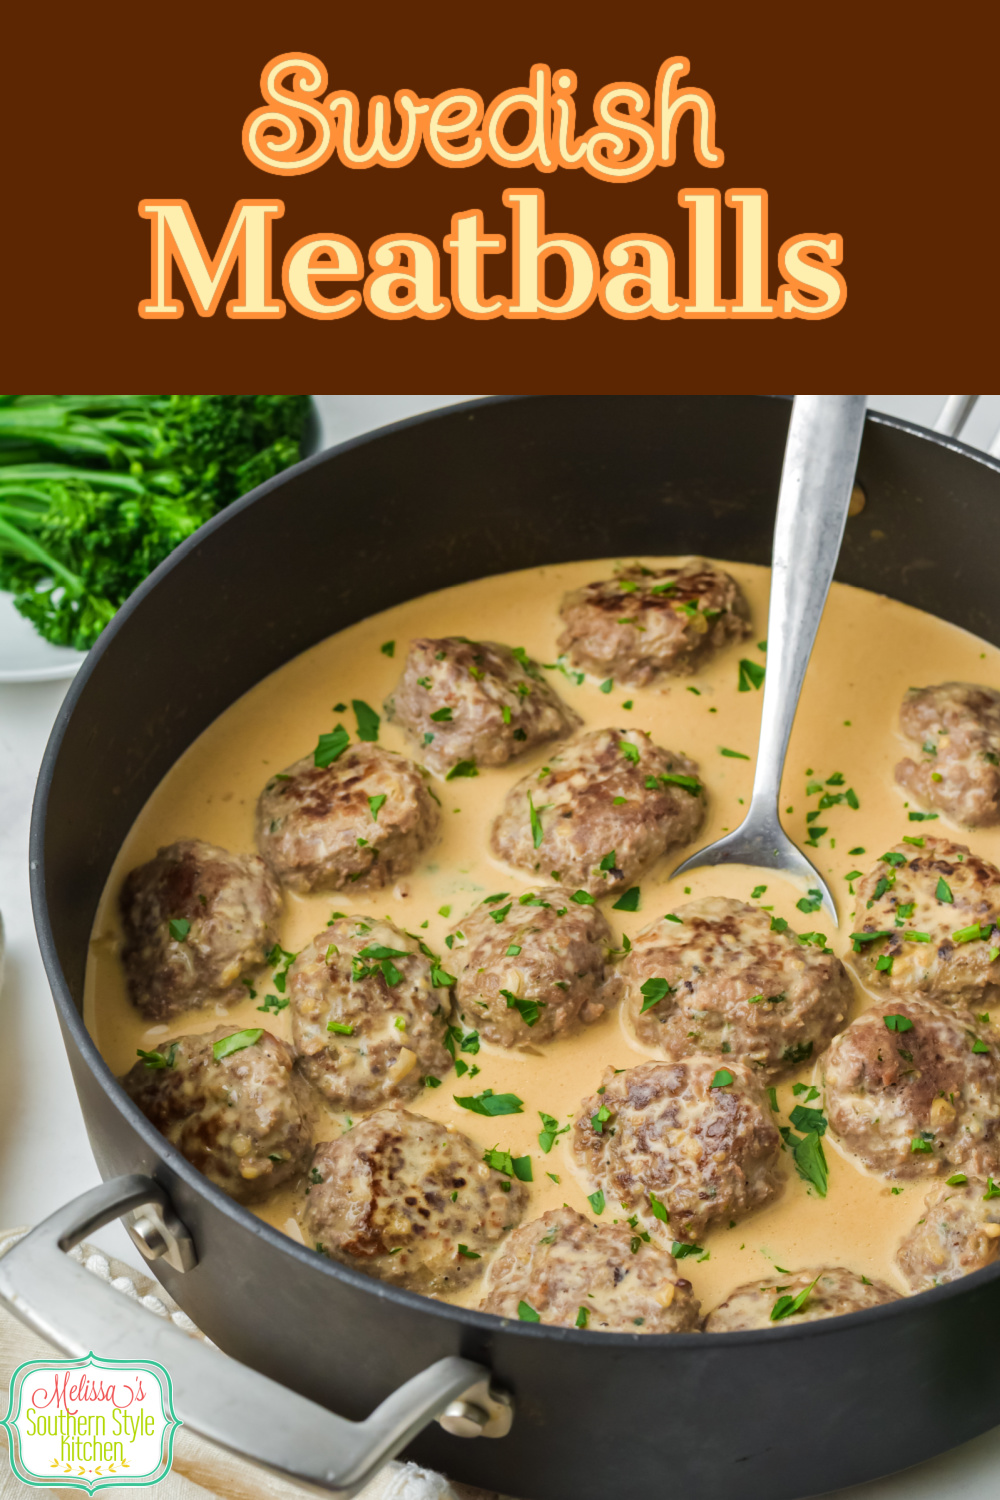 This Swedish Meatballs recipe is full flavored and versatile. It can be served both as an entrée or an appetizer for your small bites menu. #swedishmeatballs #howdoyoumakemeatballs #easymeatballsrecipes #meatballs #swedishfood #turkishmeatballs #meatballrecipes #bestswedishmeatballs